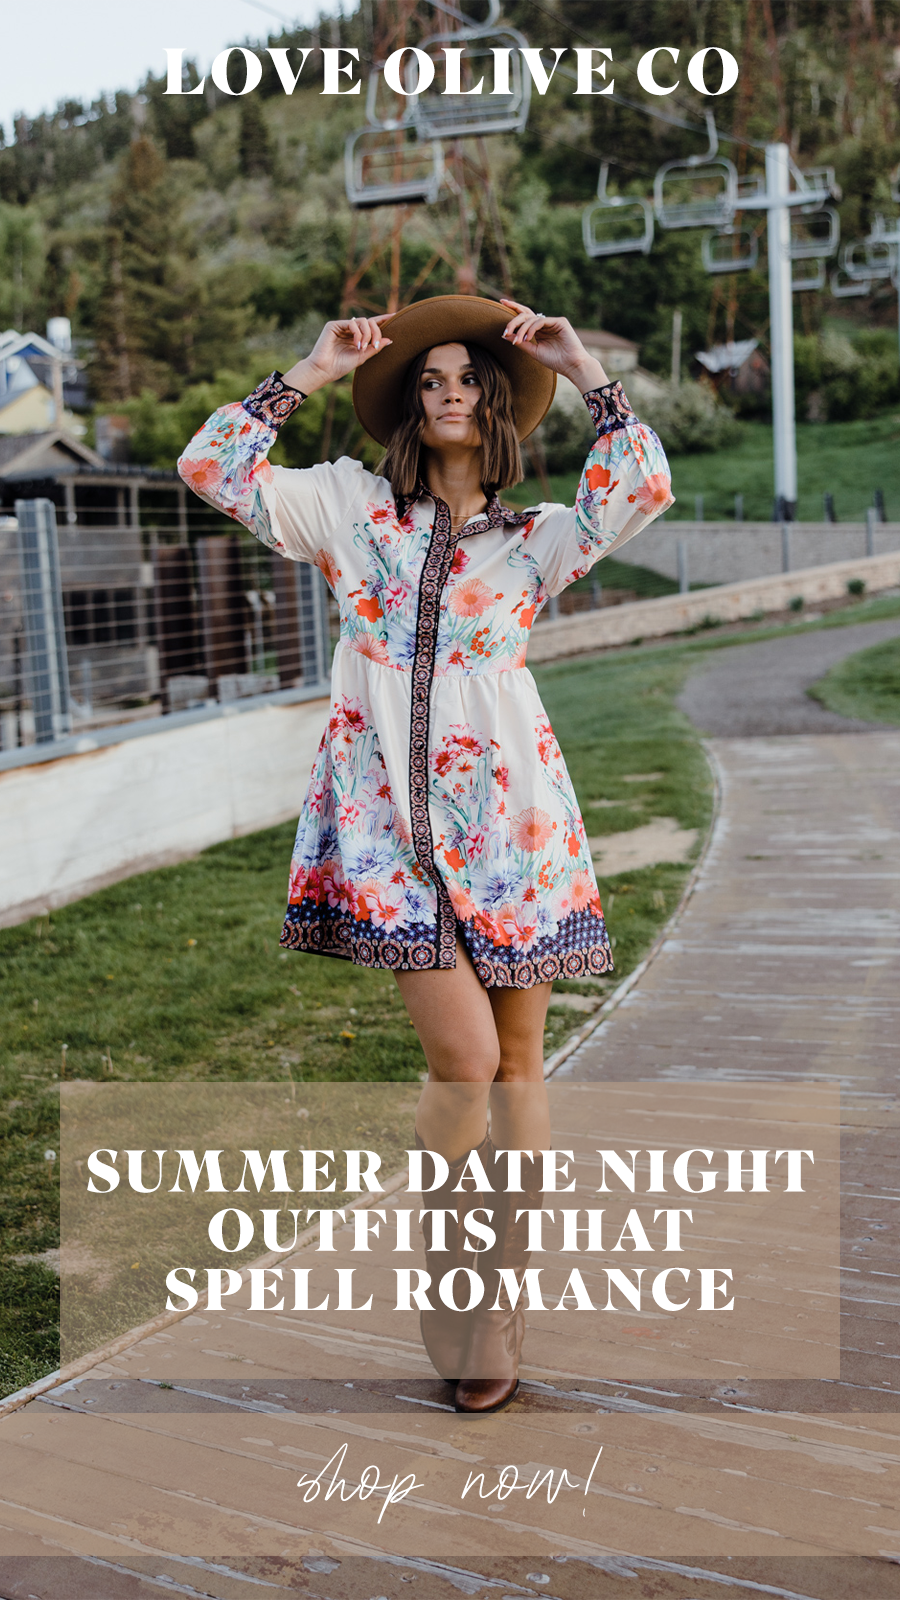 Summer Date Night Outfits That Spell Romance